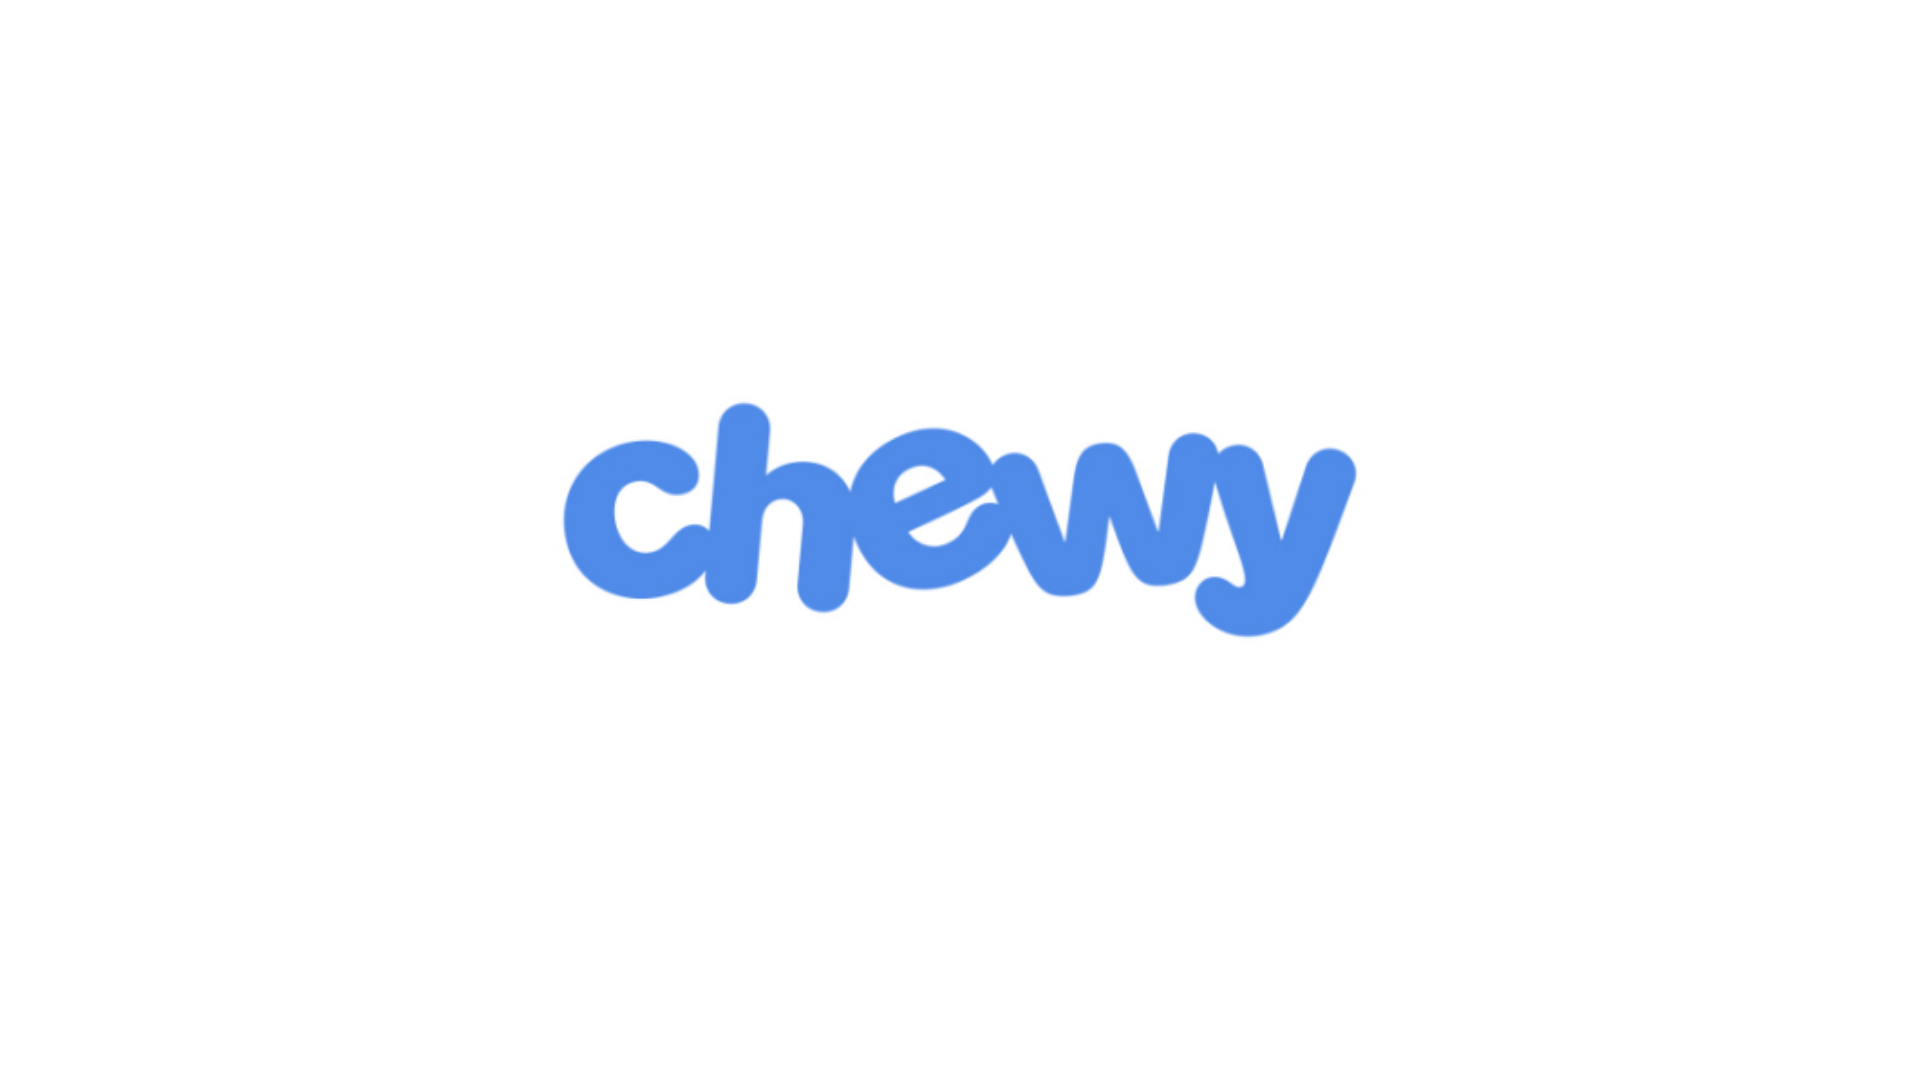 Pet care brand Chewy logo